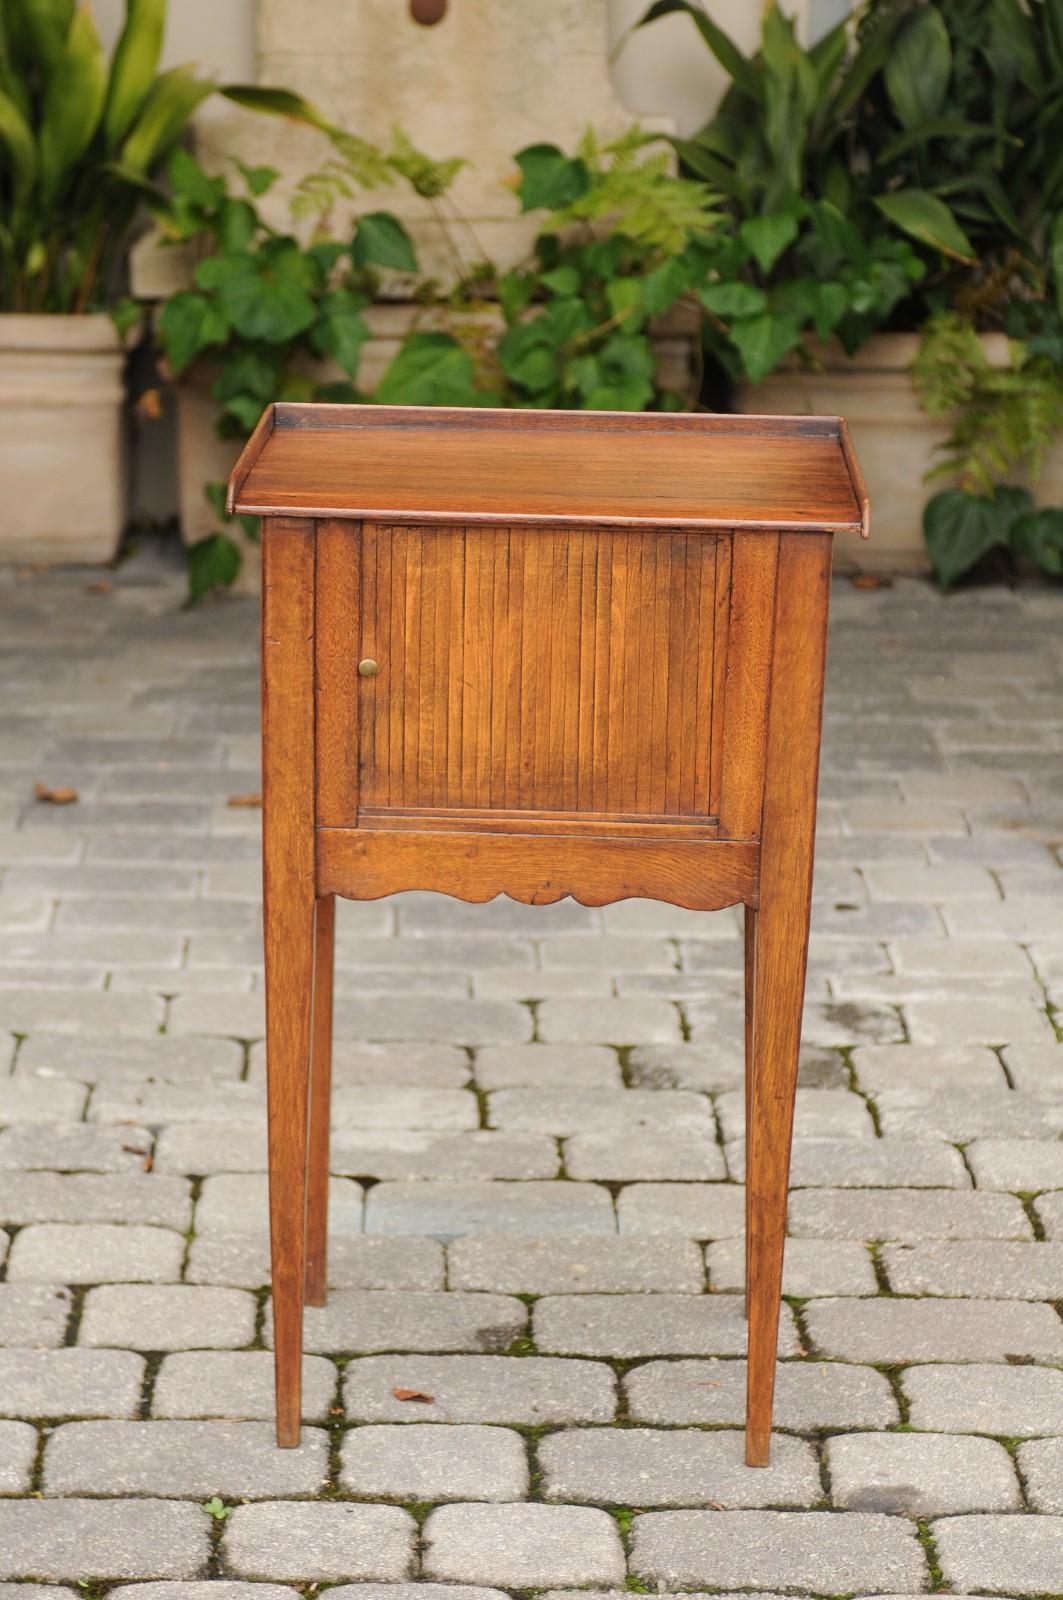 A petite French Restauration period oak bedside table from the early 19th century, with tambour door, tray top and tapered legs. Born during the French Restauration period that saw the return of monarchy after the first French revolution, this